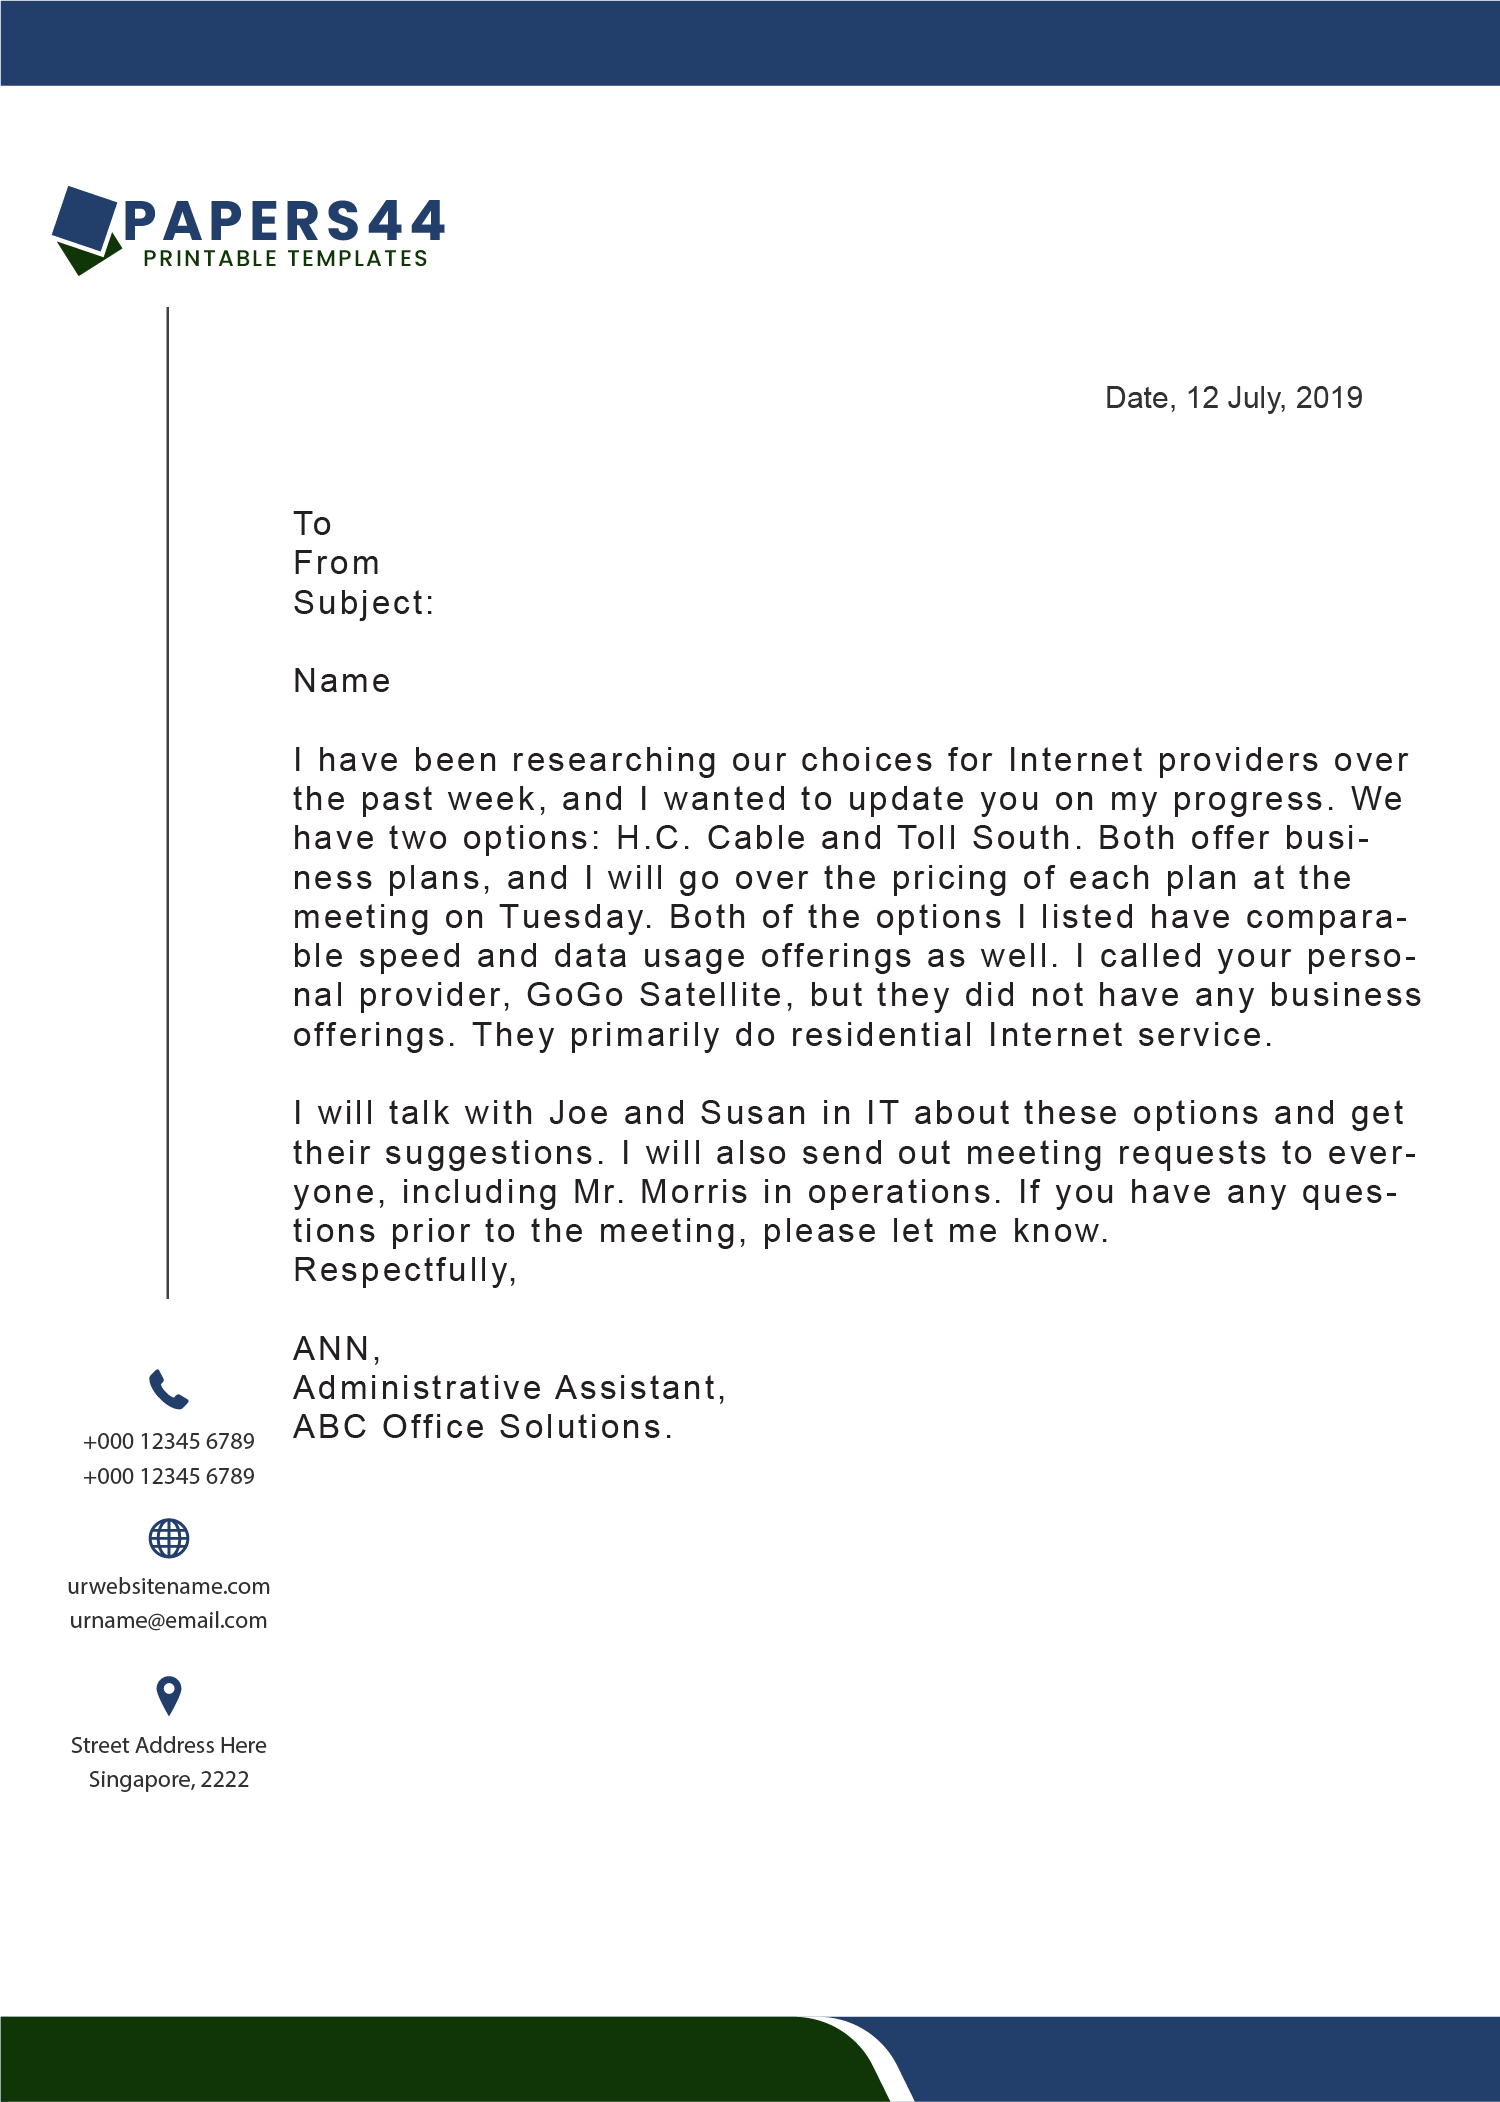 Professional Business Letter Templates